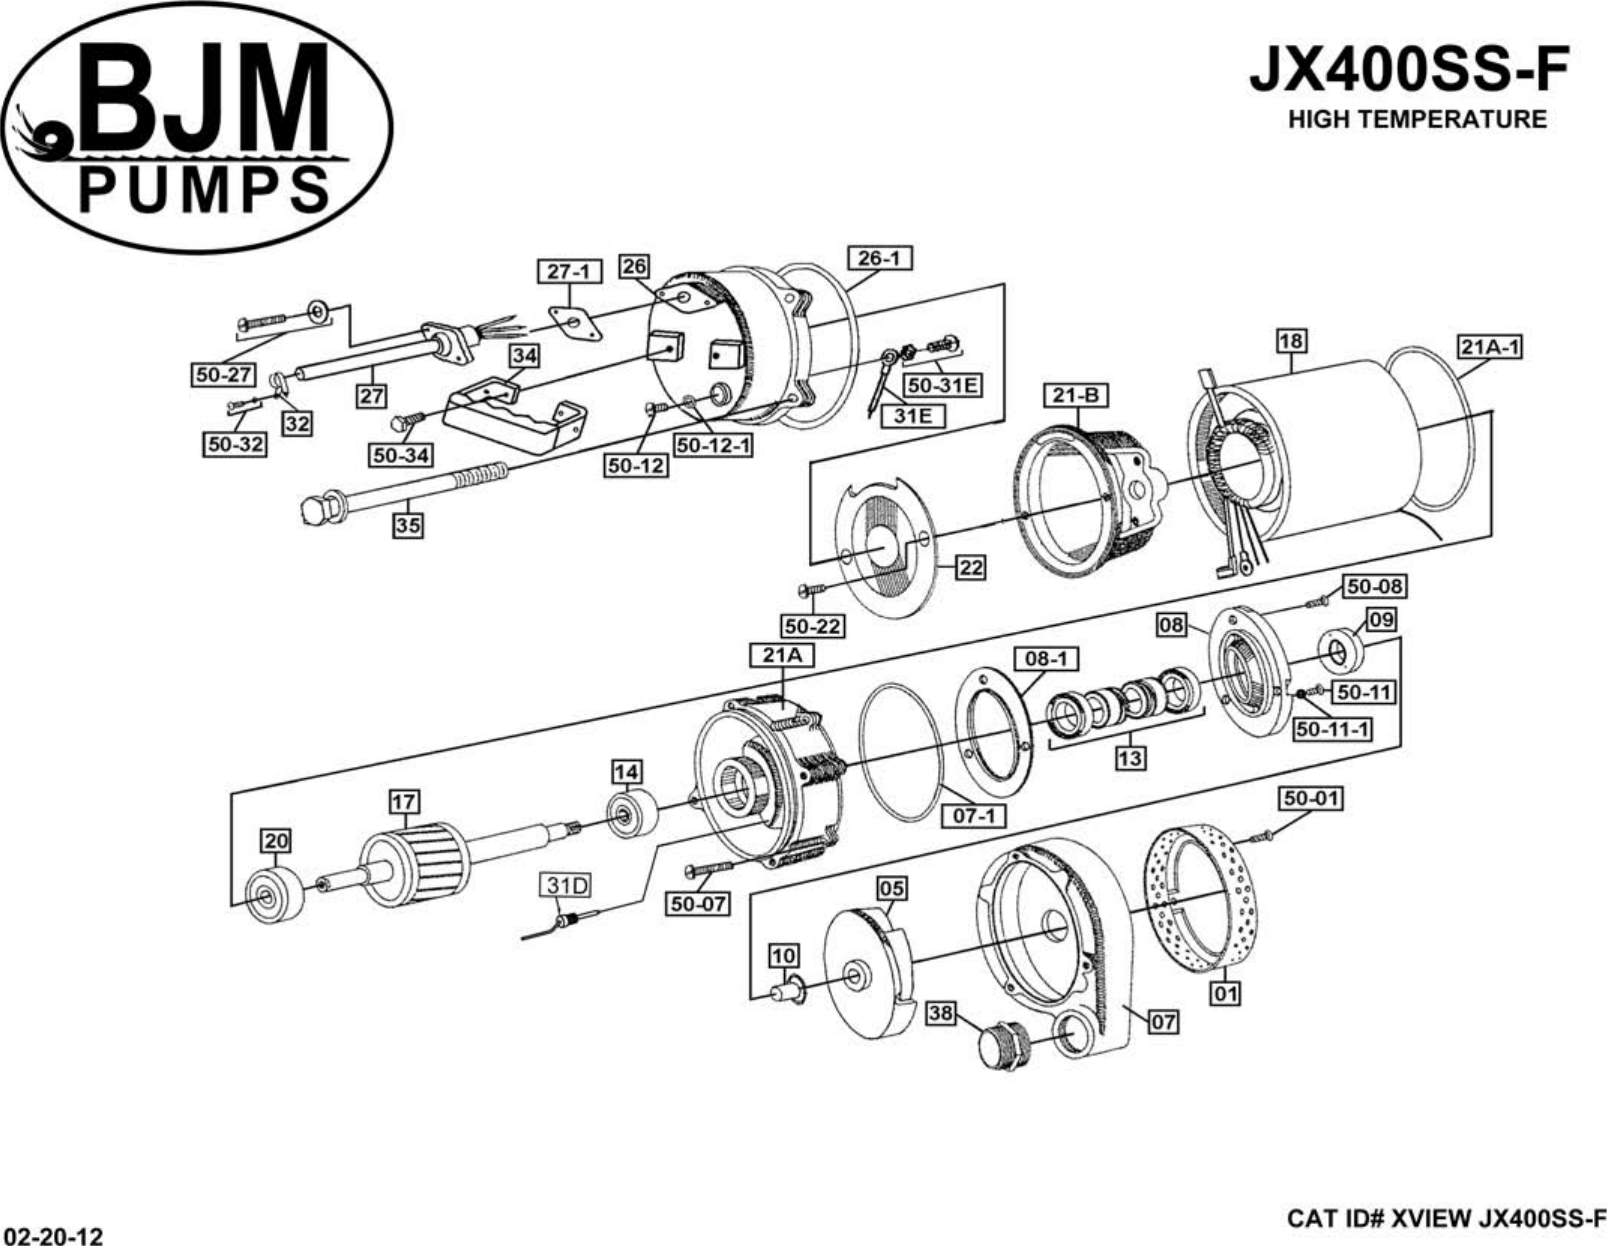 Page 1 of 5 - 136284 6 Bjm Jxf Series Exploded View User Manual